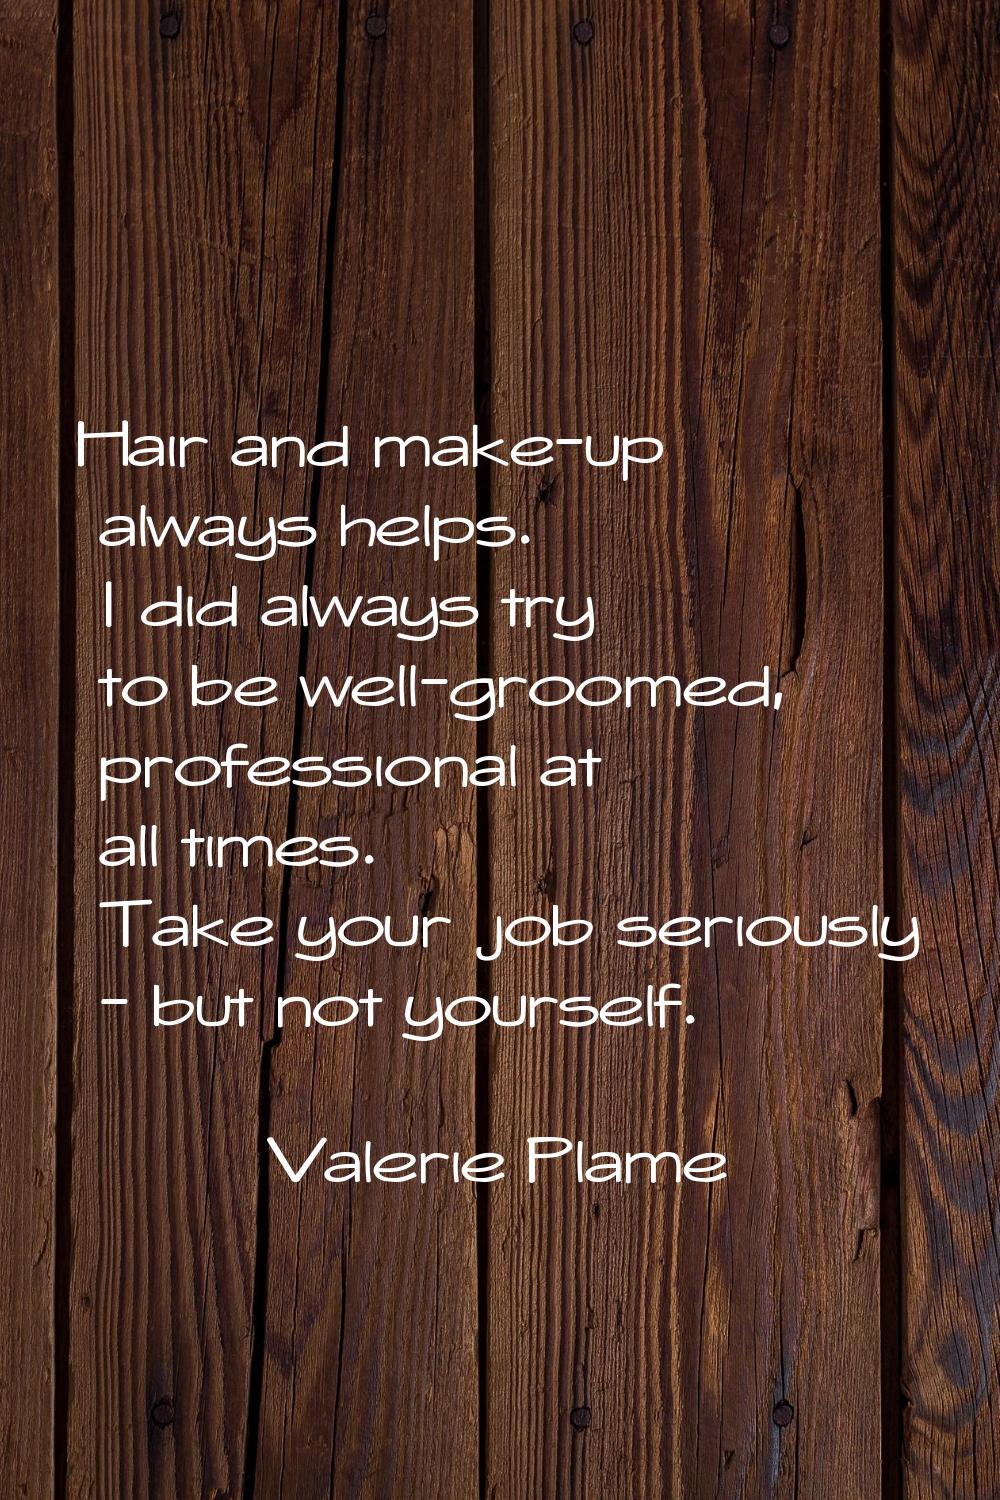 Hair and make-up always helps. I did always try to be well-groomed, professional at all times. Take